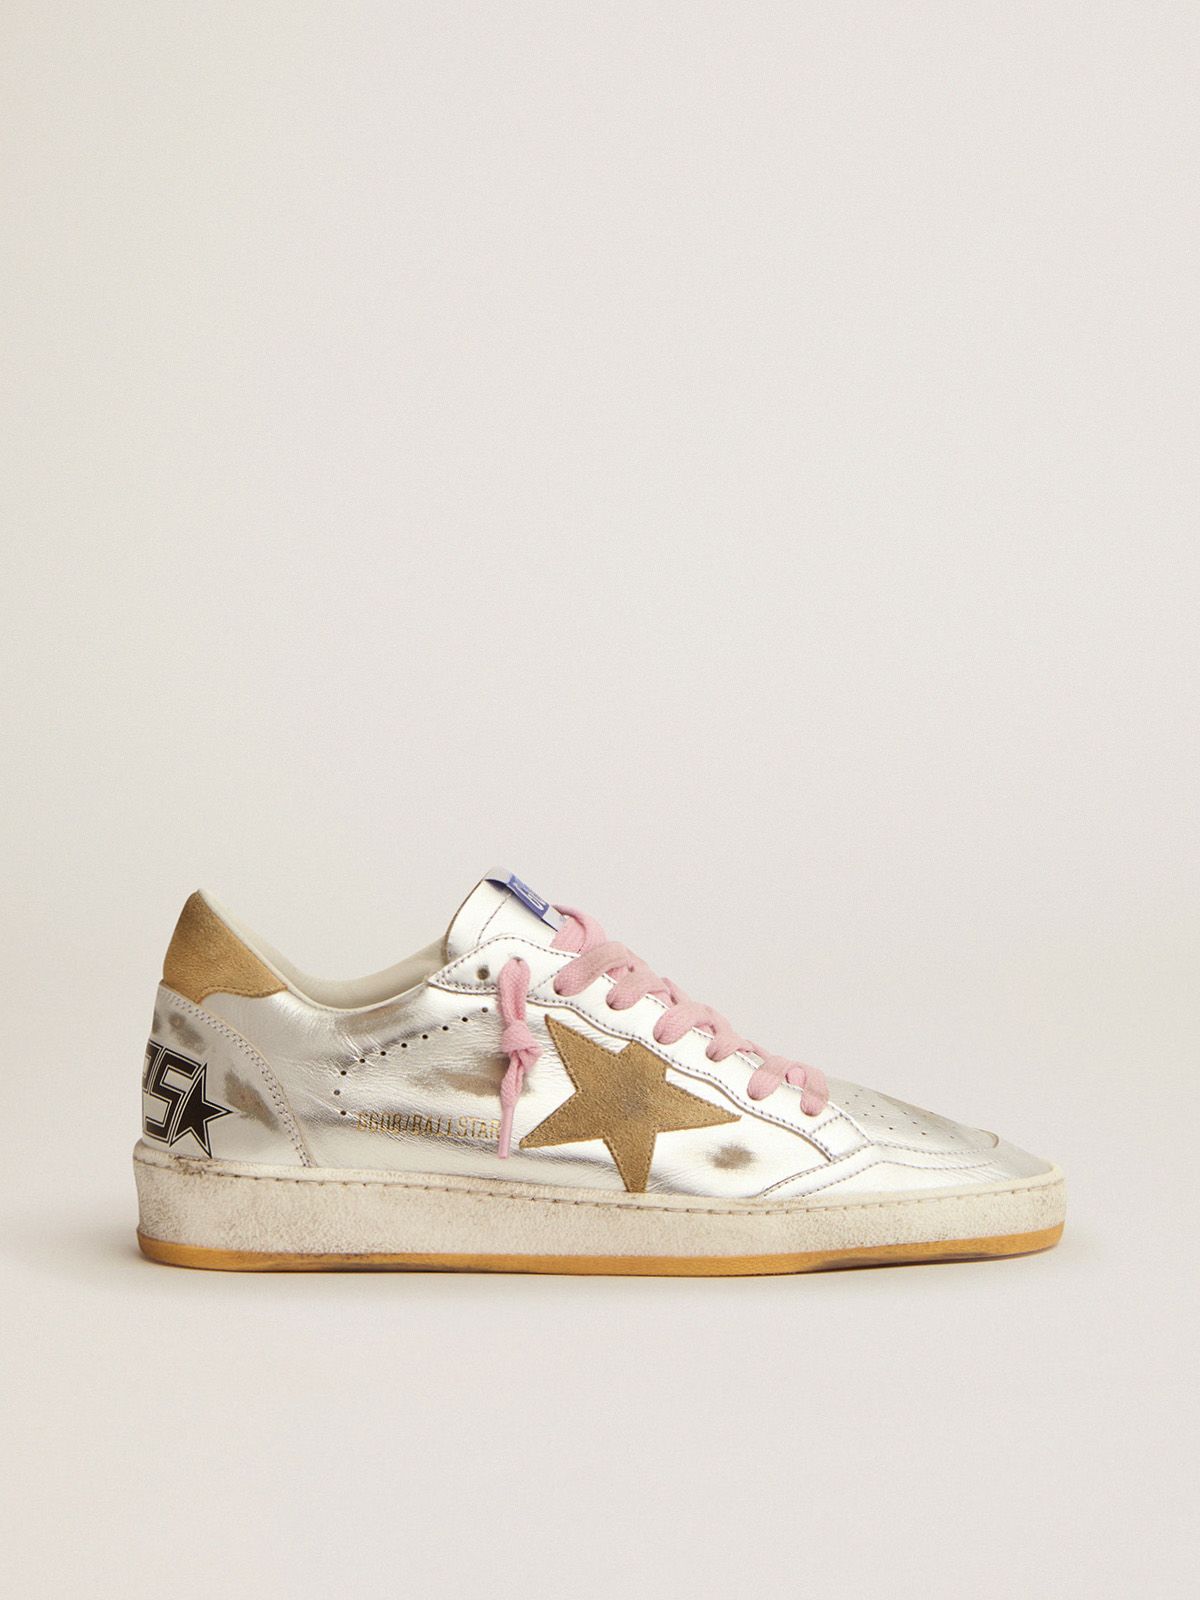 Golden Goose Sneakers Donna Ball Star LTD sneakers in silver laminated leather with sand-colored suede details